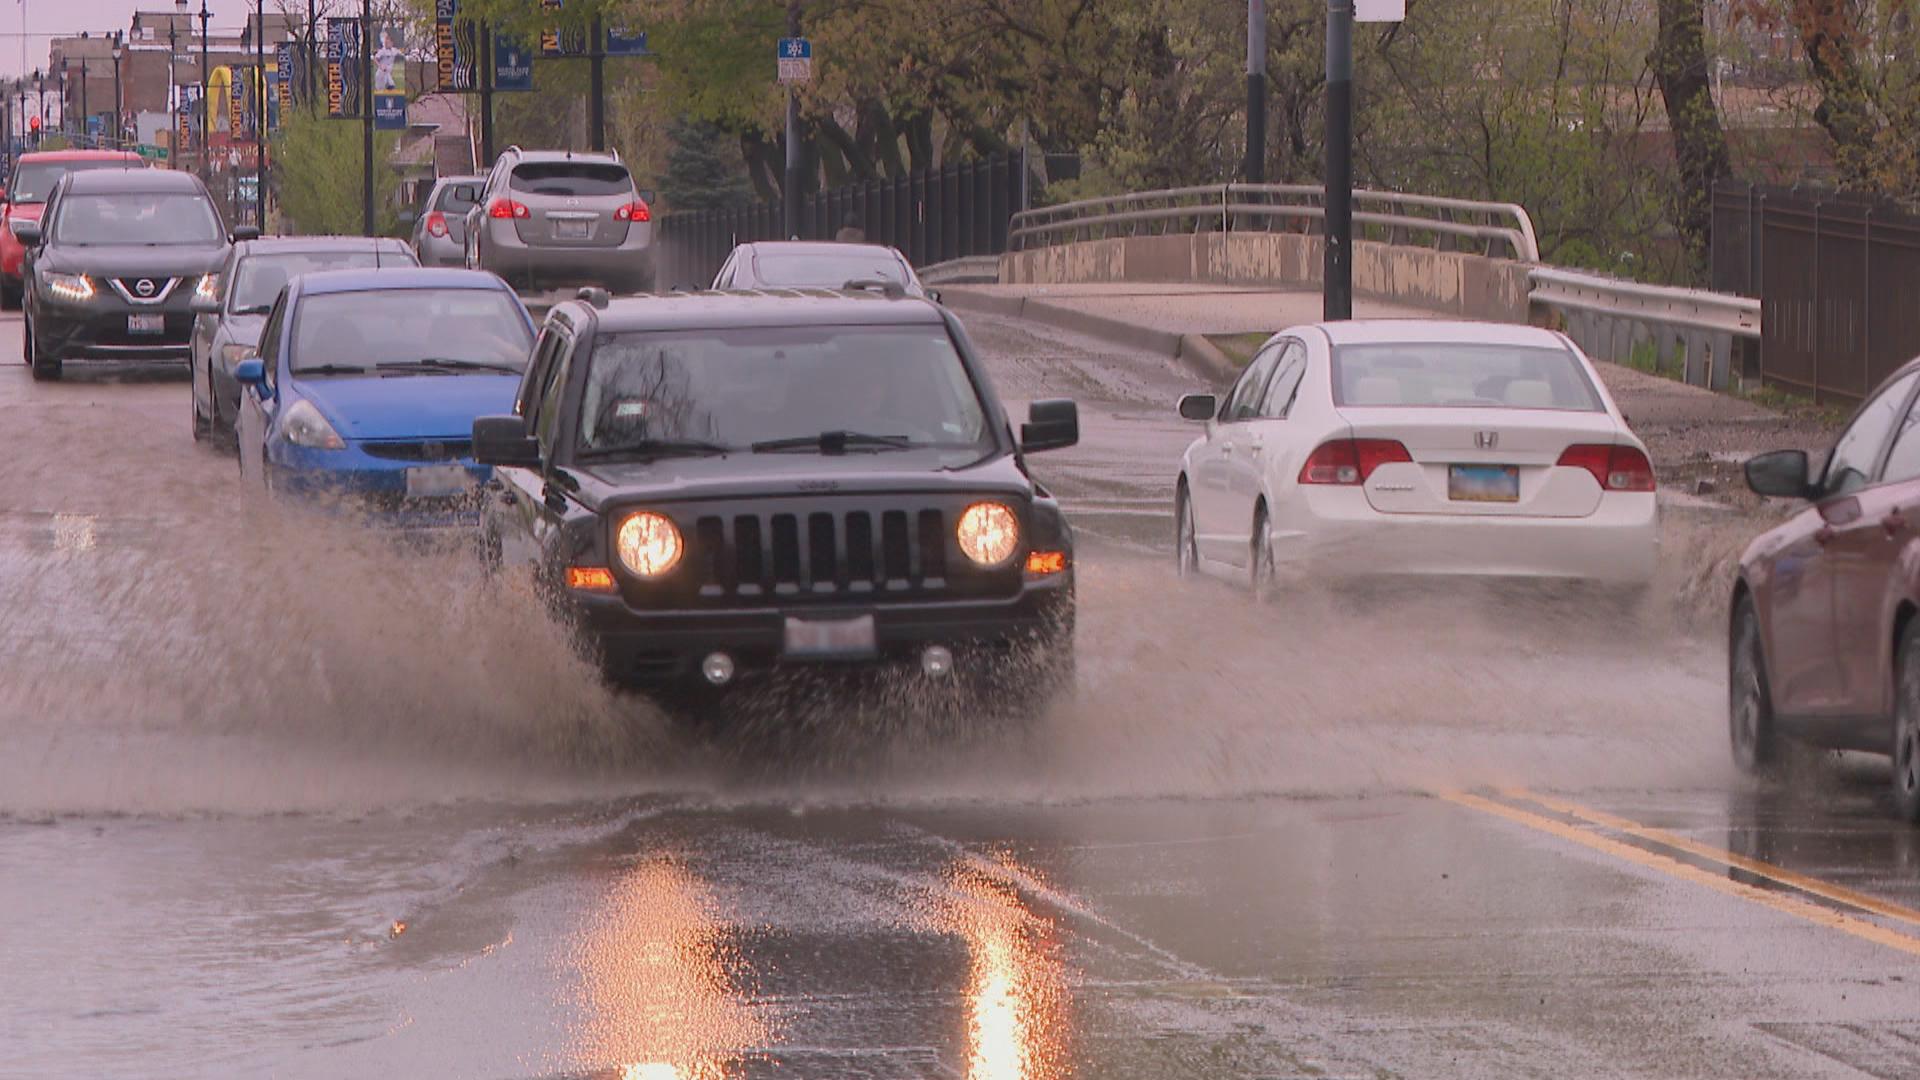 Standing water along Foster Avenue near River Park on May 1, 2019 was caused by catch basins that filled with debris and drained slowly, according to a spokesperson for the Chicago Department of Transportation.